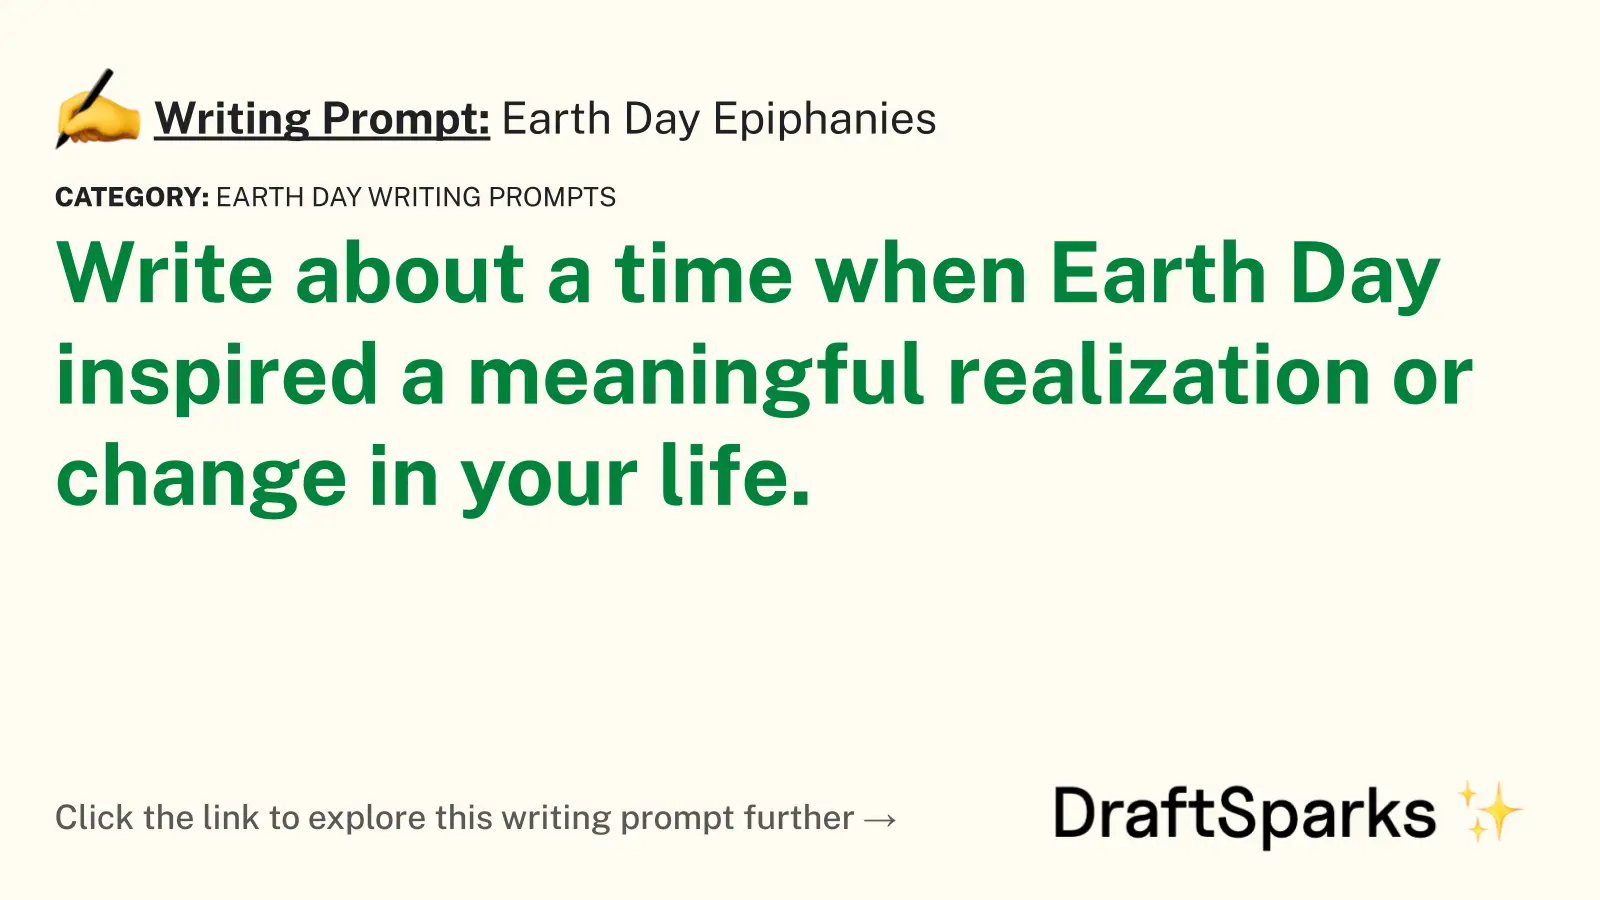 Earth Day Epiphanies